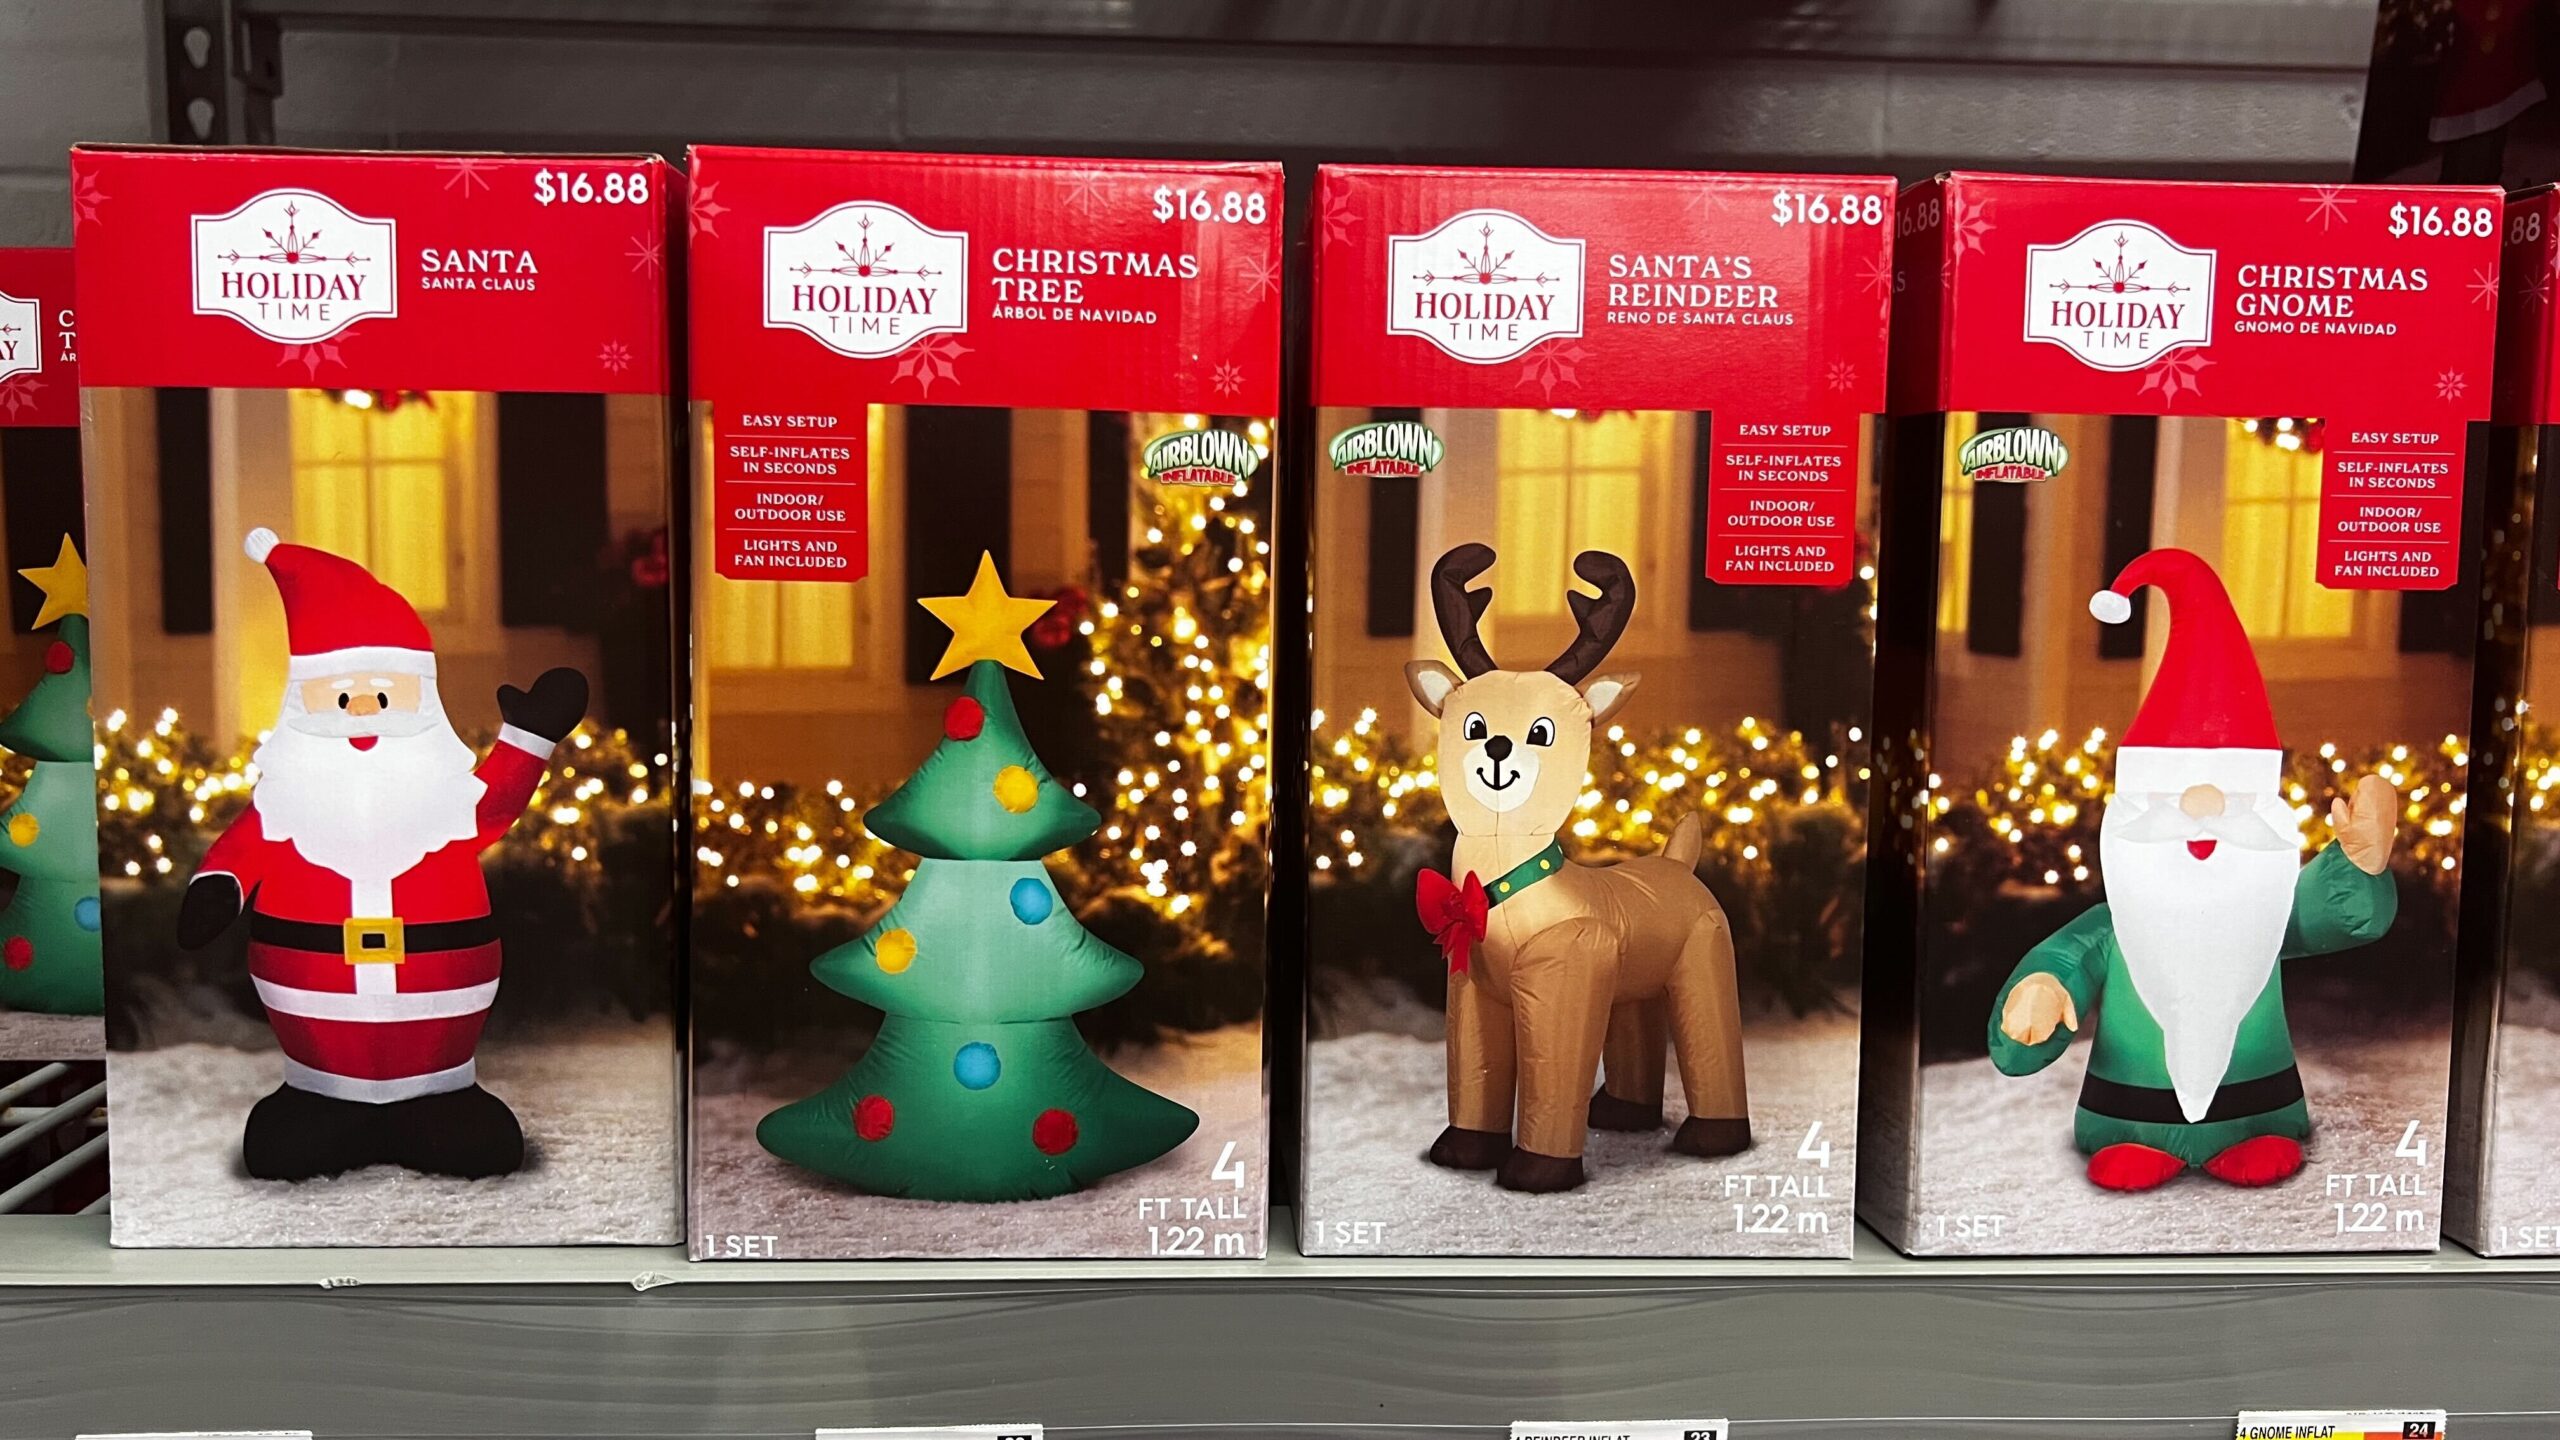 Walmart Christmas Inflatables Starting At Just 16.88 The Freebie Guy®